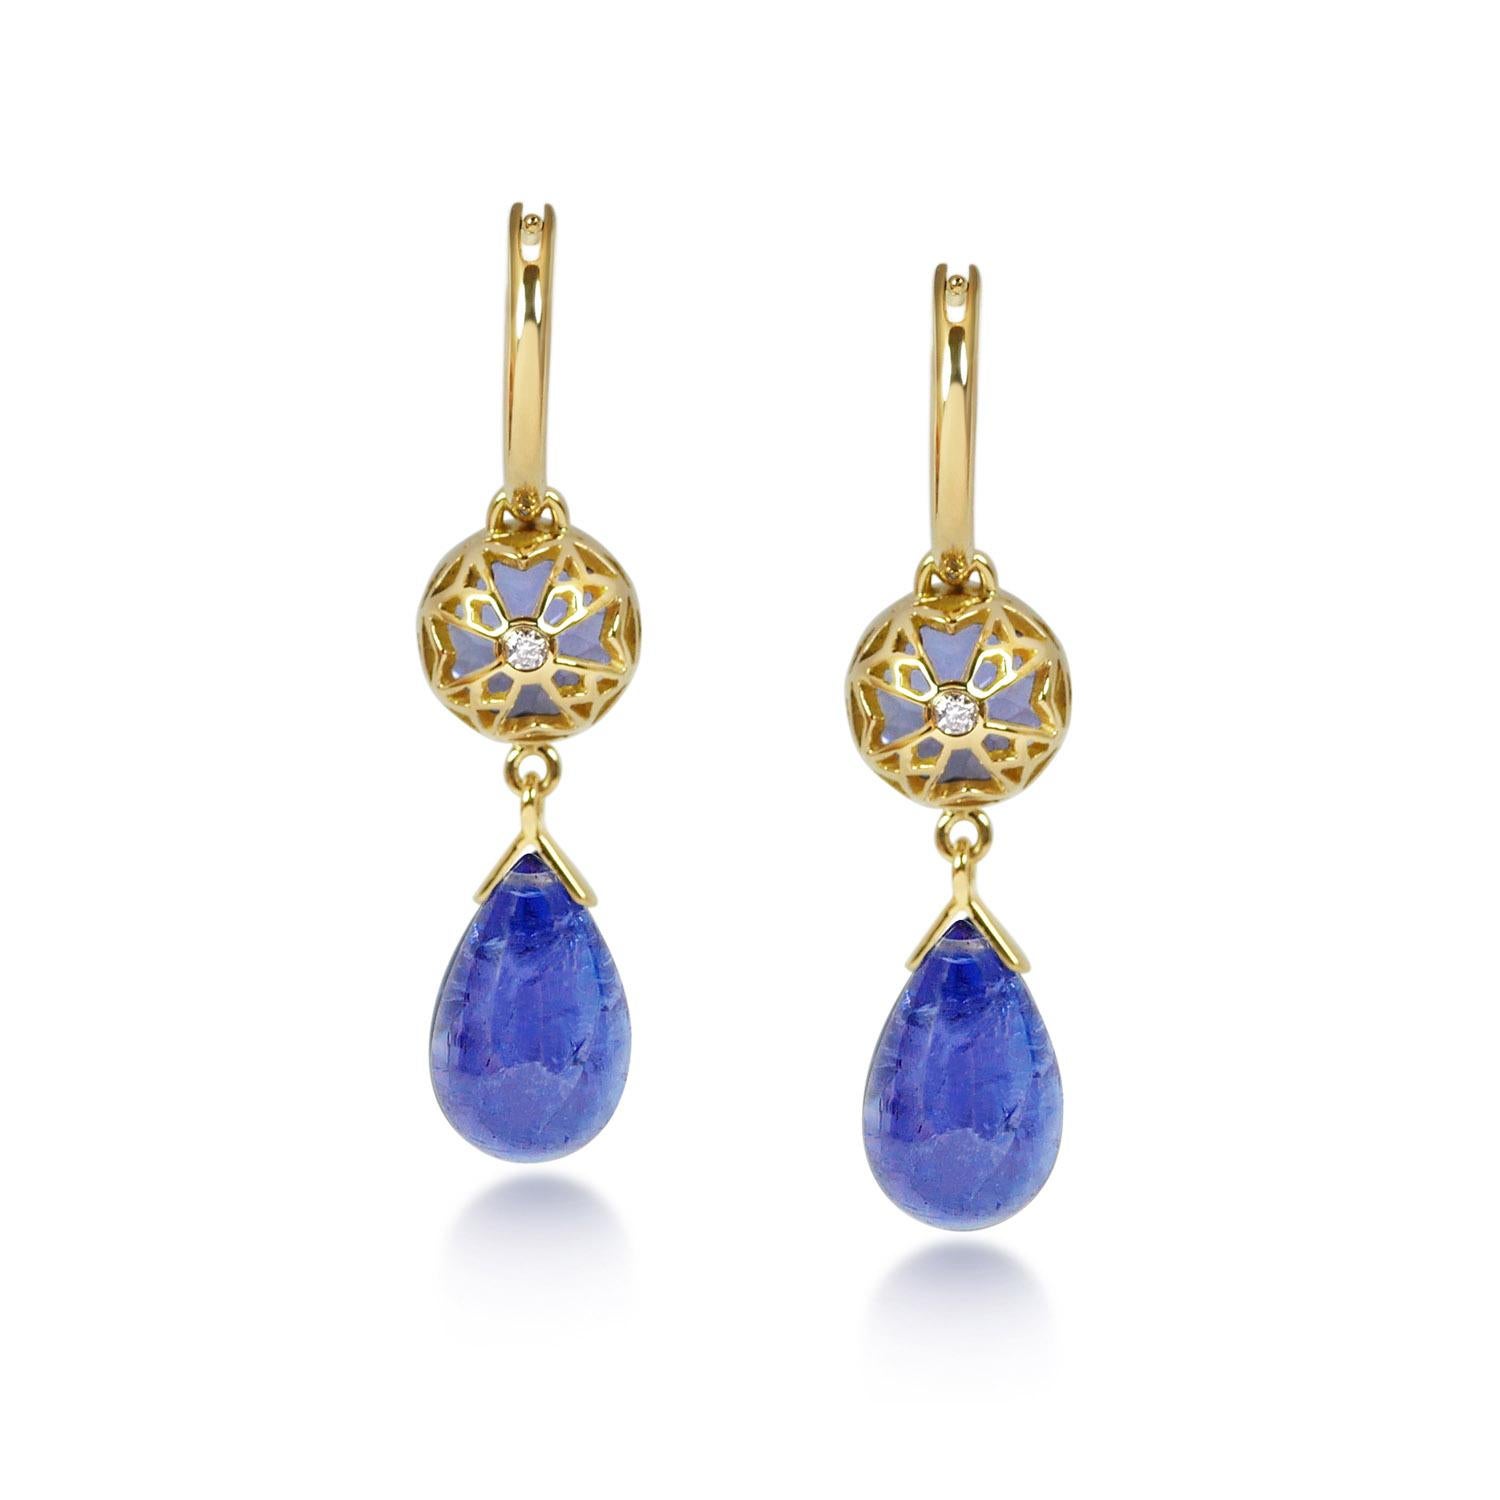 Handcrafted 2.80 & 10.95 Carats Tanzanites 18 Karat Yellow Gold Drop Earrings. Dancing drops carved in Tanzanite under a set of 8mm round cut Tanzanite stones encased in our iconic hand pierced gold lace to let the light through. A diamond has been